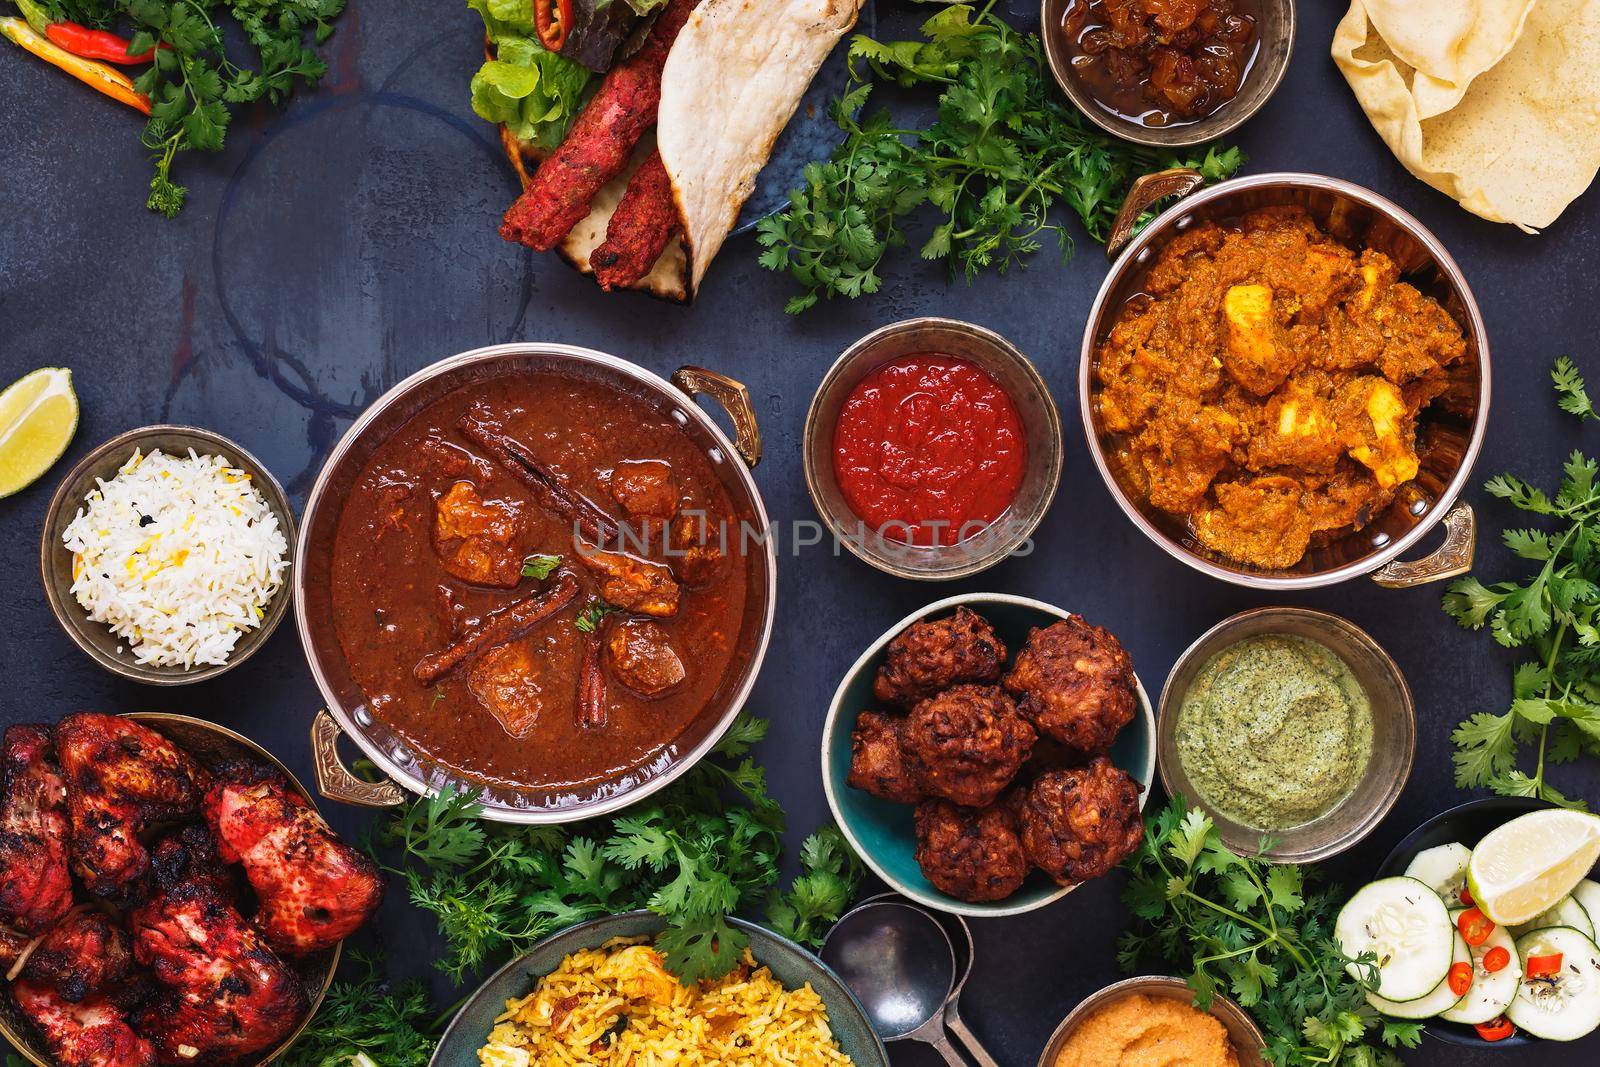 Taste of India. A selection of Indian food with various bowls of food featuring  chicken tikka masala, rogan josh, kebabs, tandoori chicken wings, pasties, poppadoms with dips and naan bread